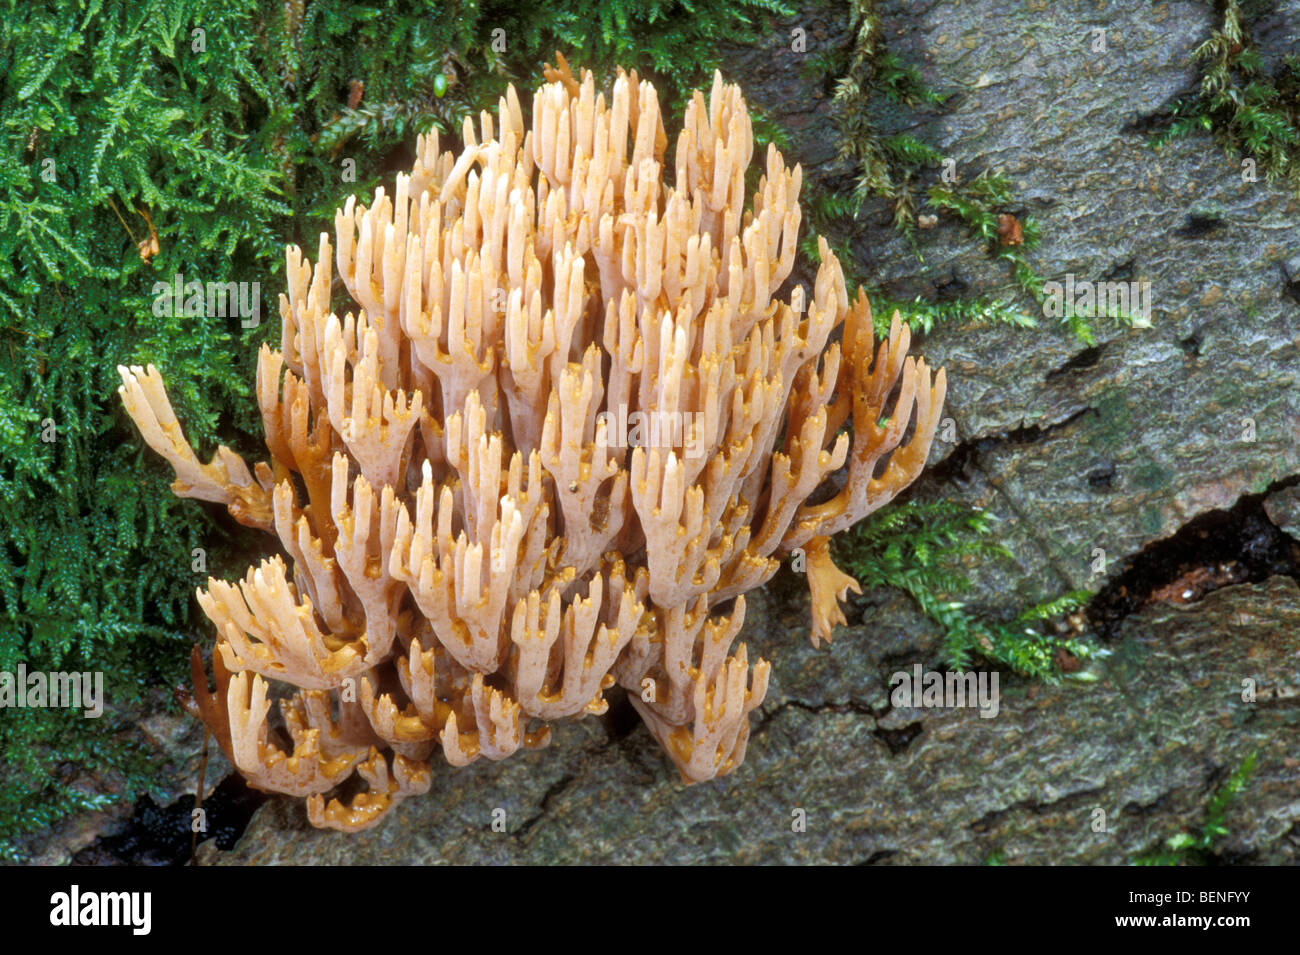 Upright coral / strict-branch coral (Ramaria stricta) growing on tree trunk Stock Photo